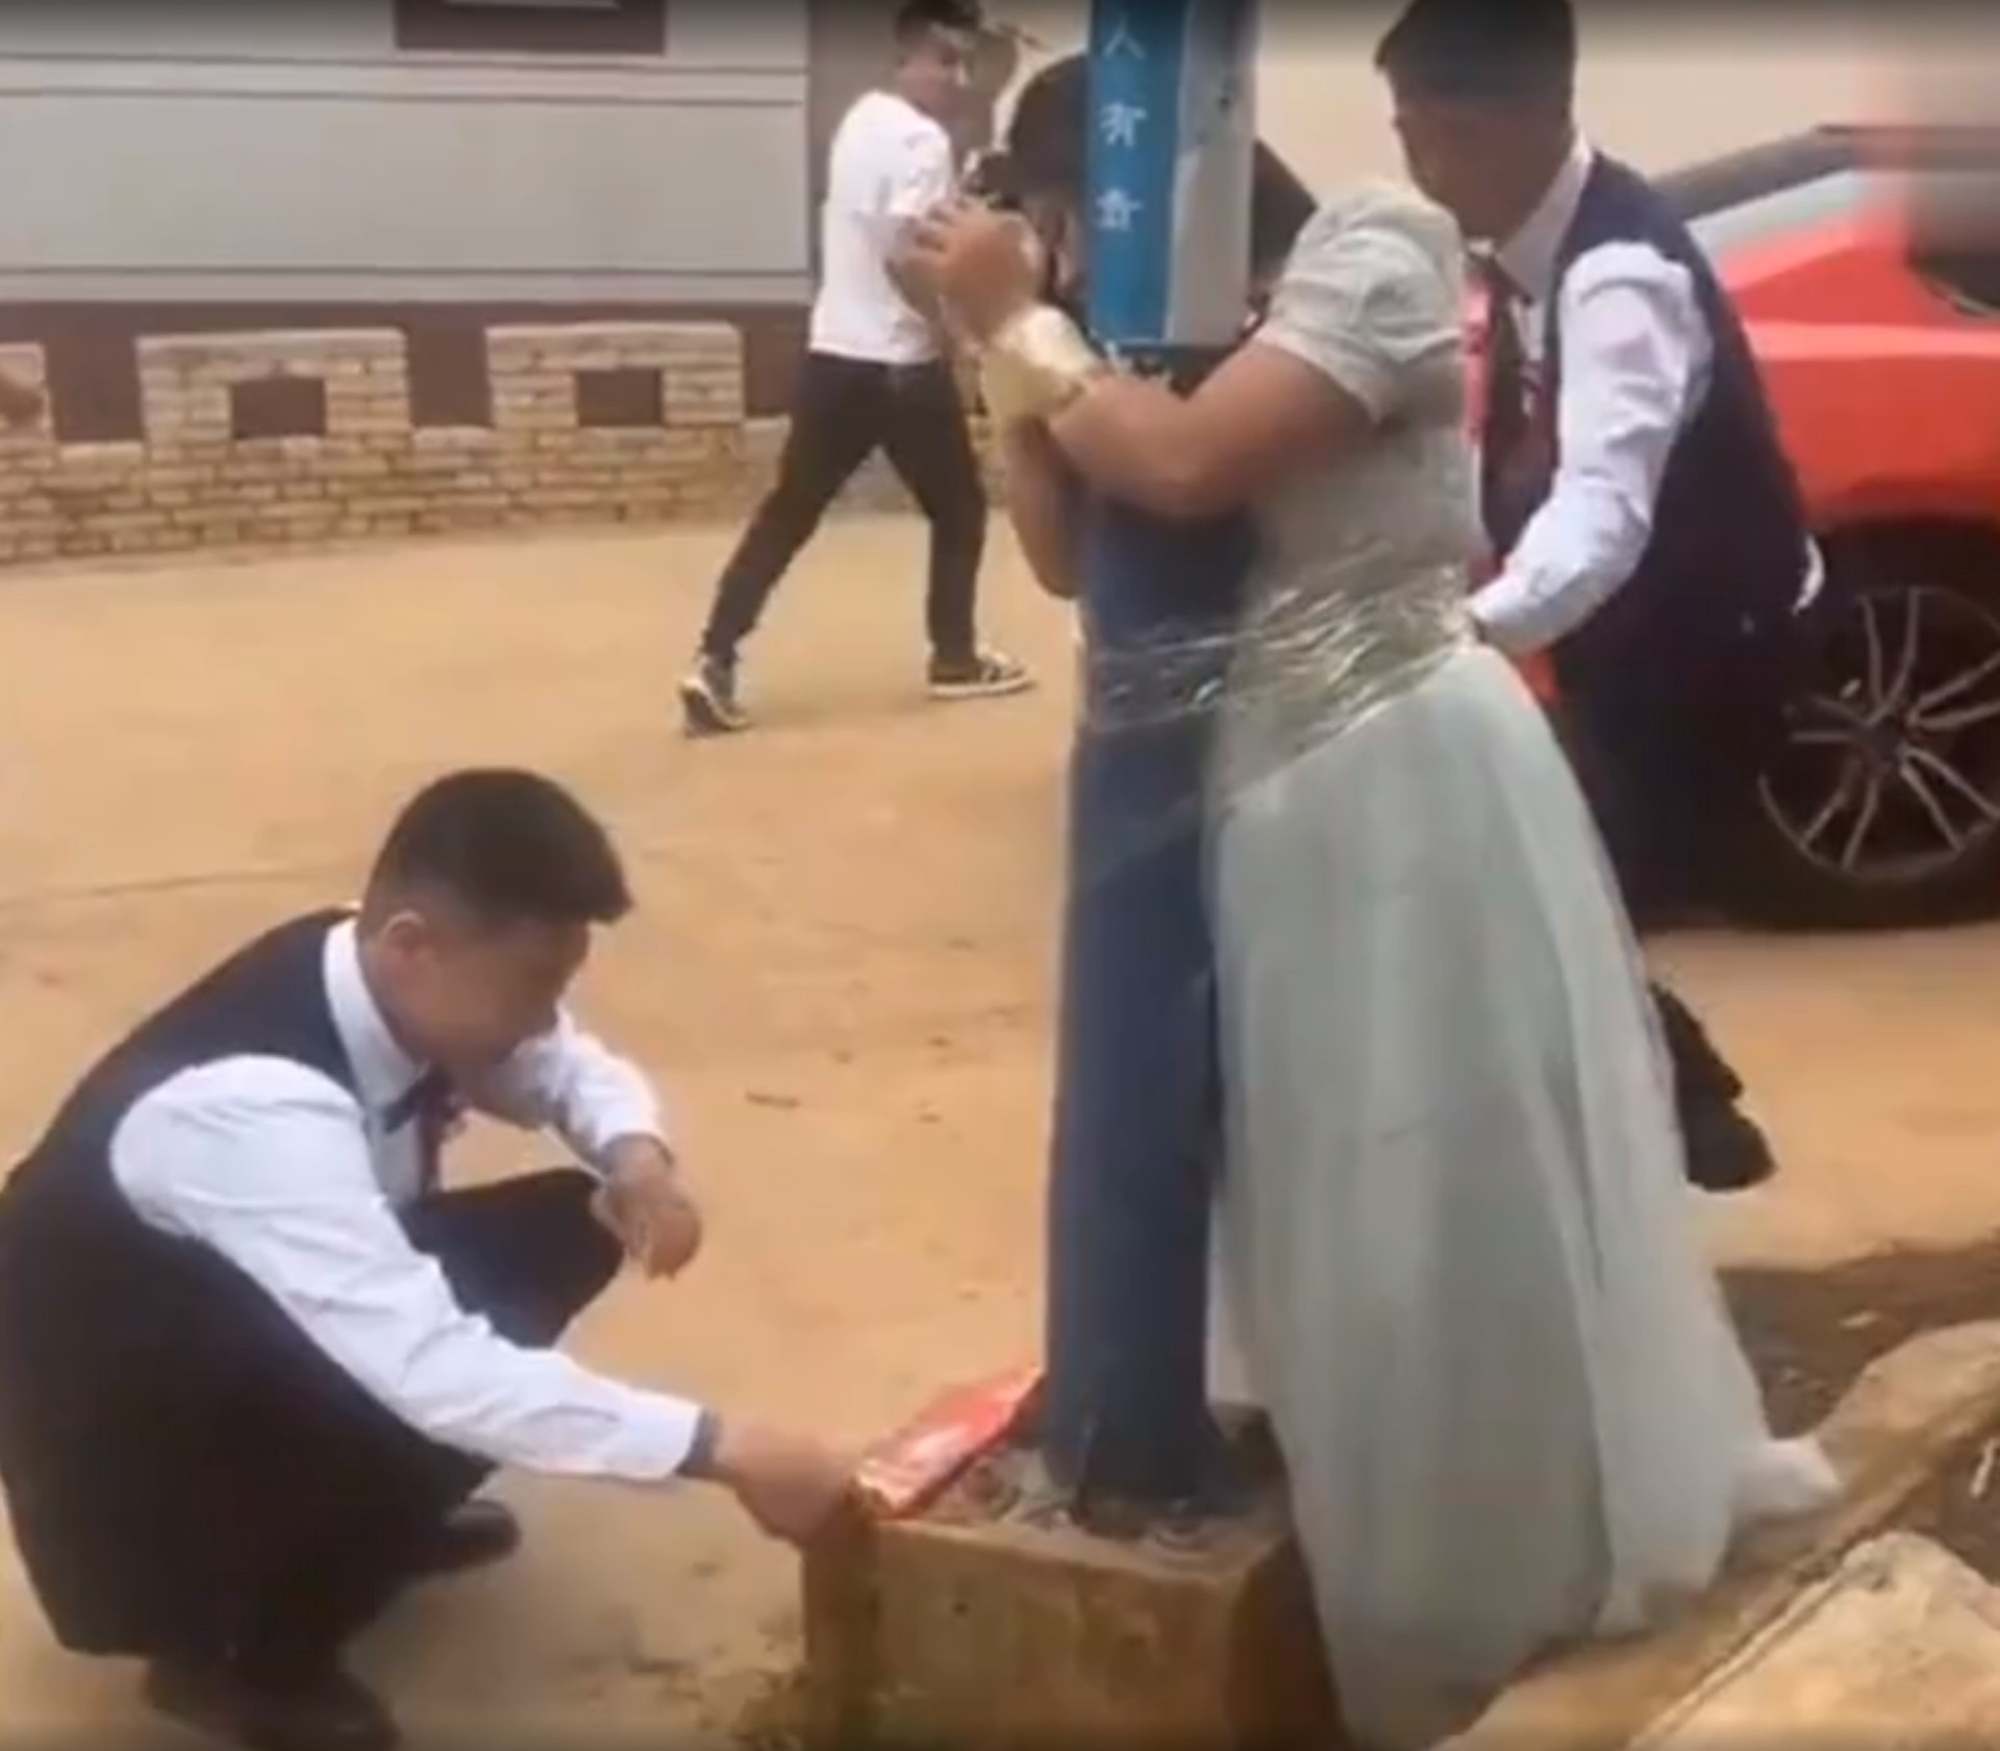 Chinese wedding ritual sparks outrage over inappropriate behaviour